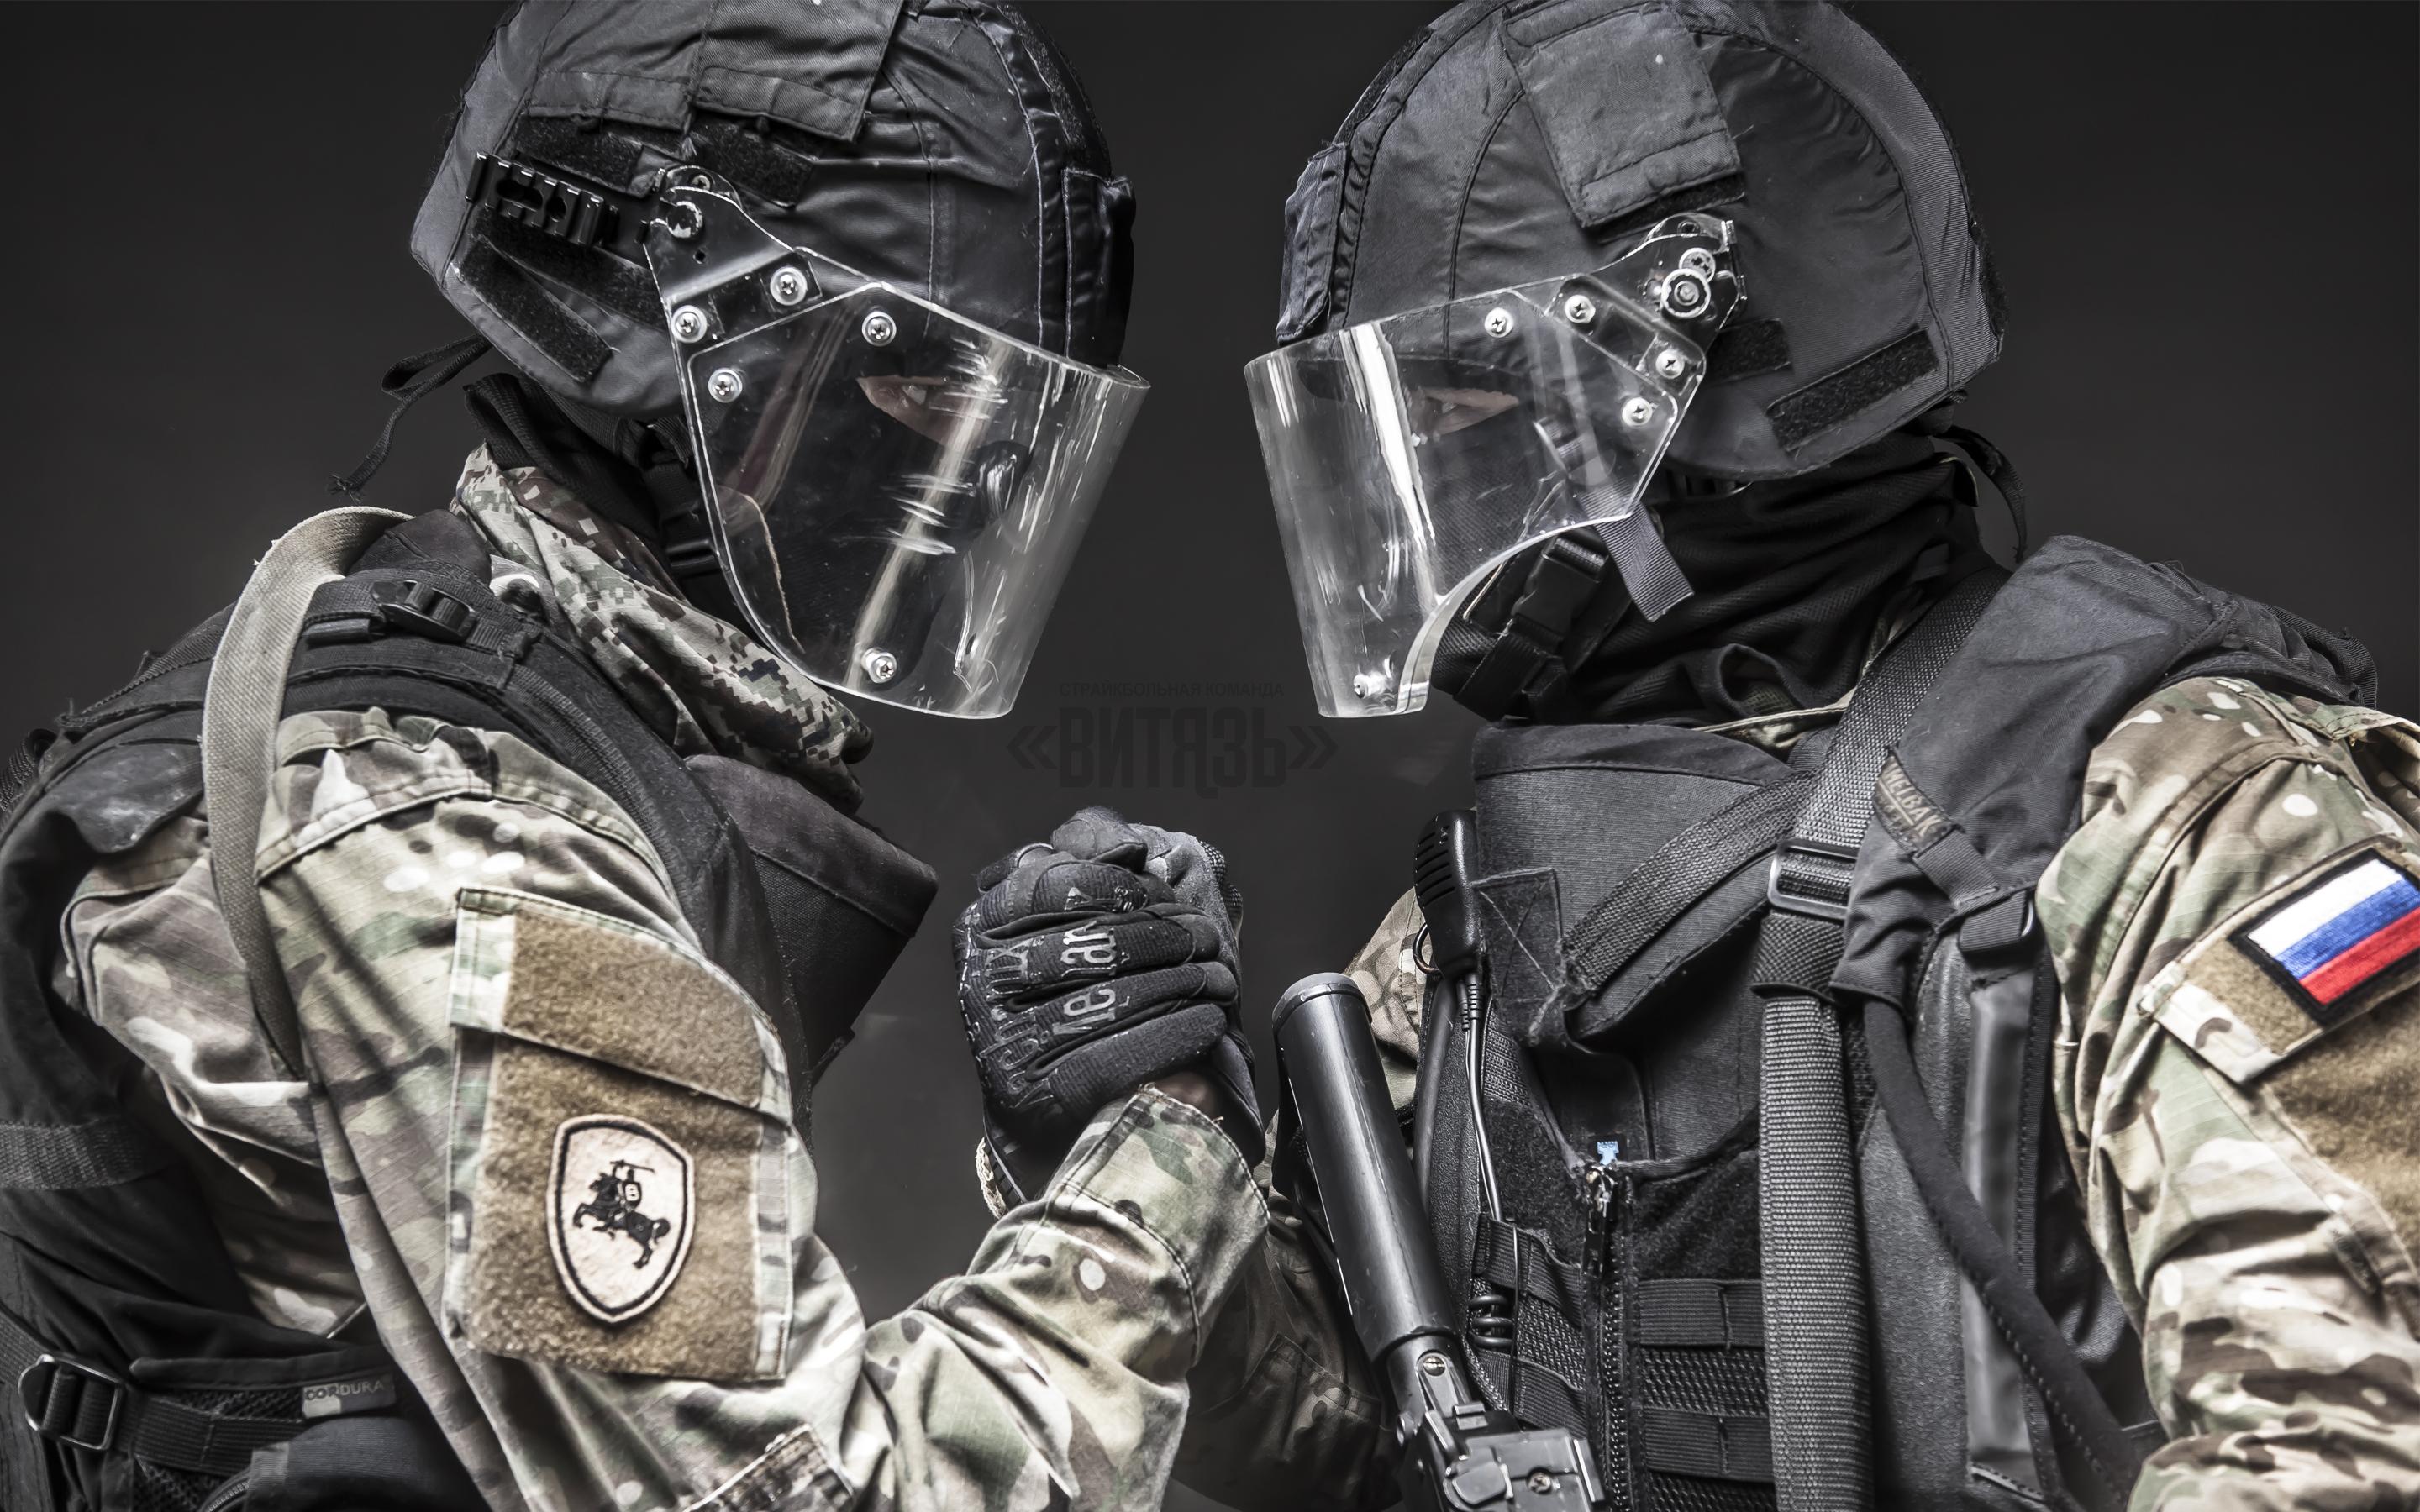 Special Forces soldiers Knight Desktop wallpaper 1680x1050